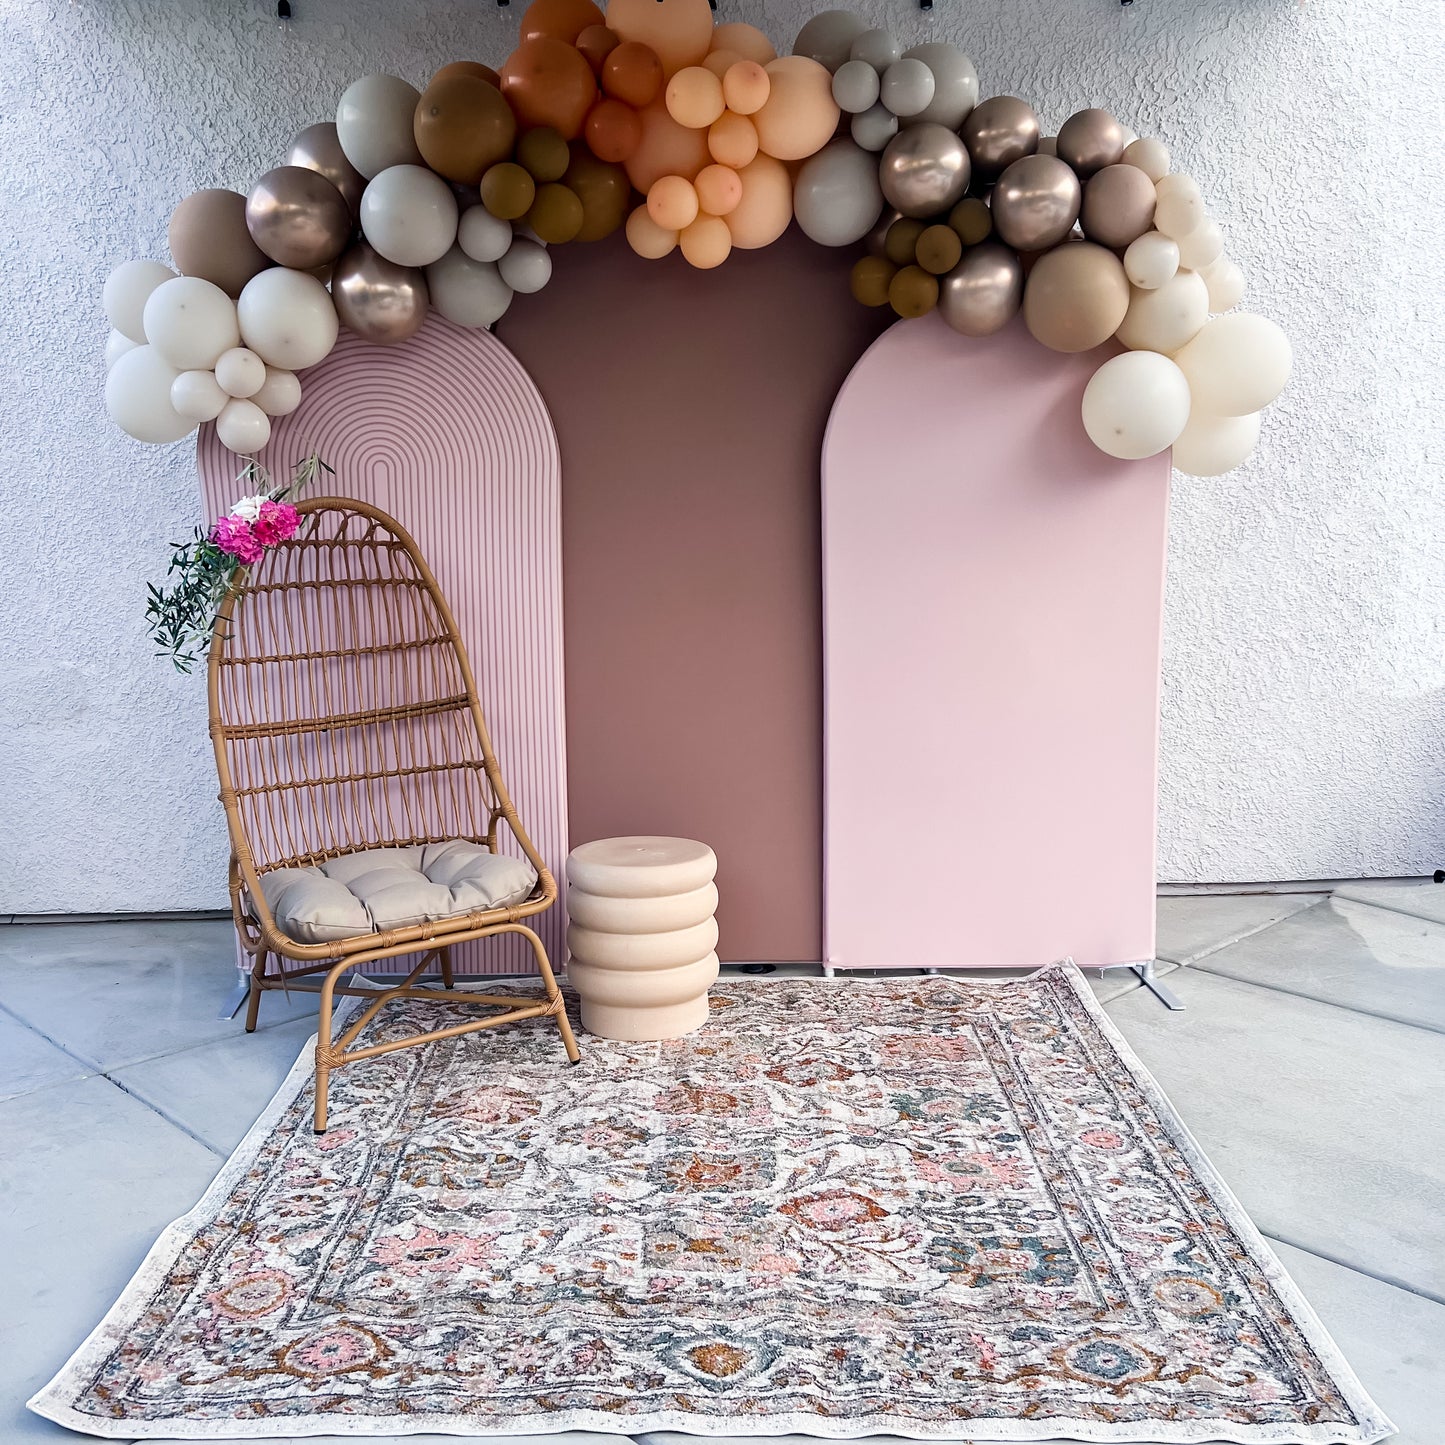 Boho Set Up with Peacock or Rattan Chair